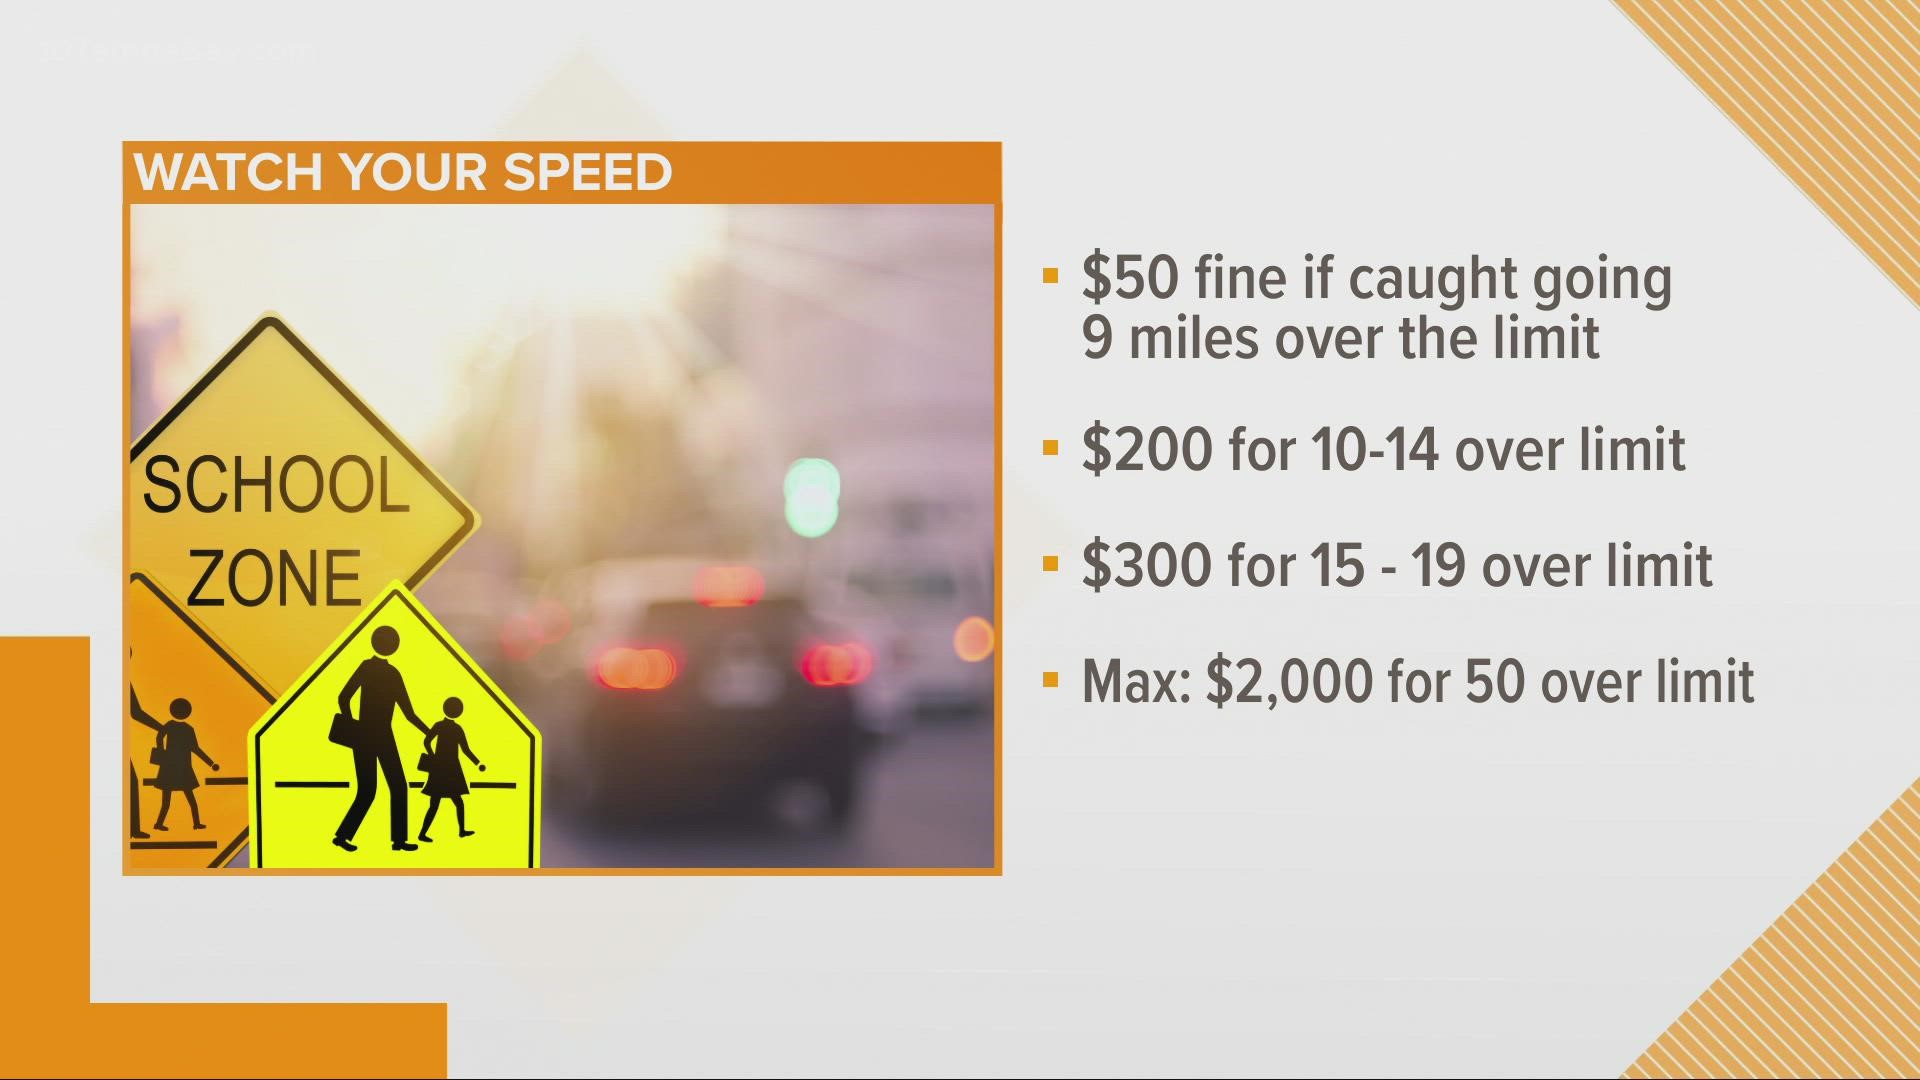 Speeding in school zones is a problem across Tampa Bay and Florida. With school back in session, officers will be out enforcing speed limits.